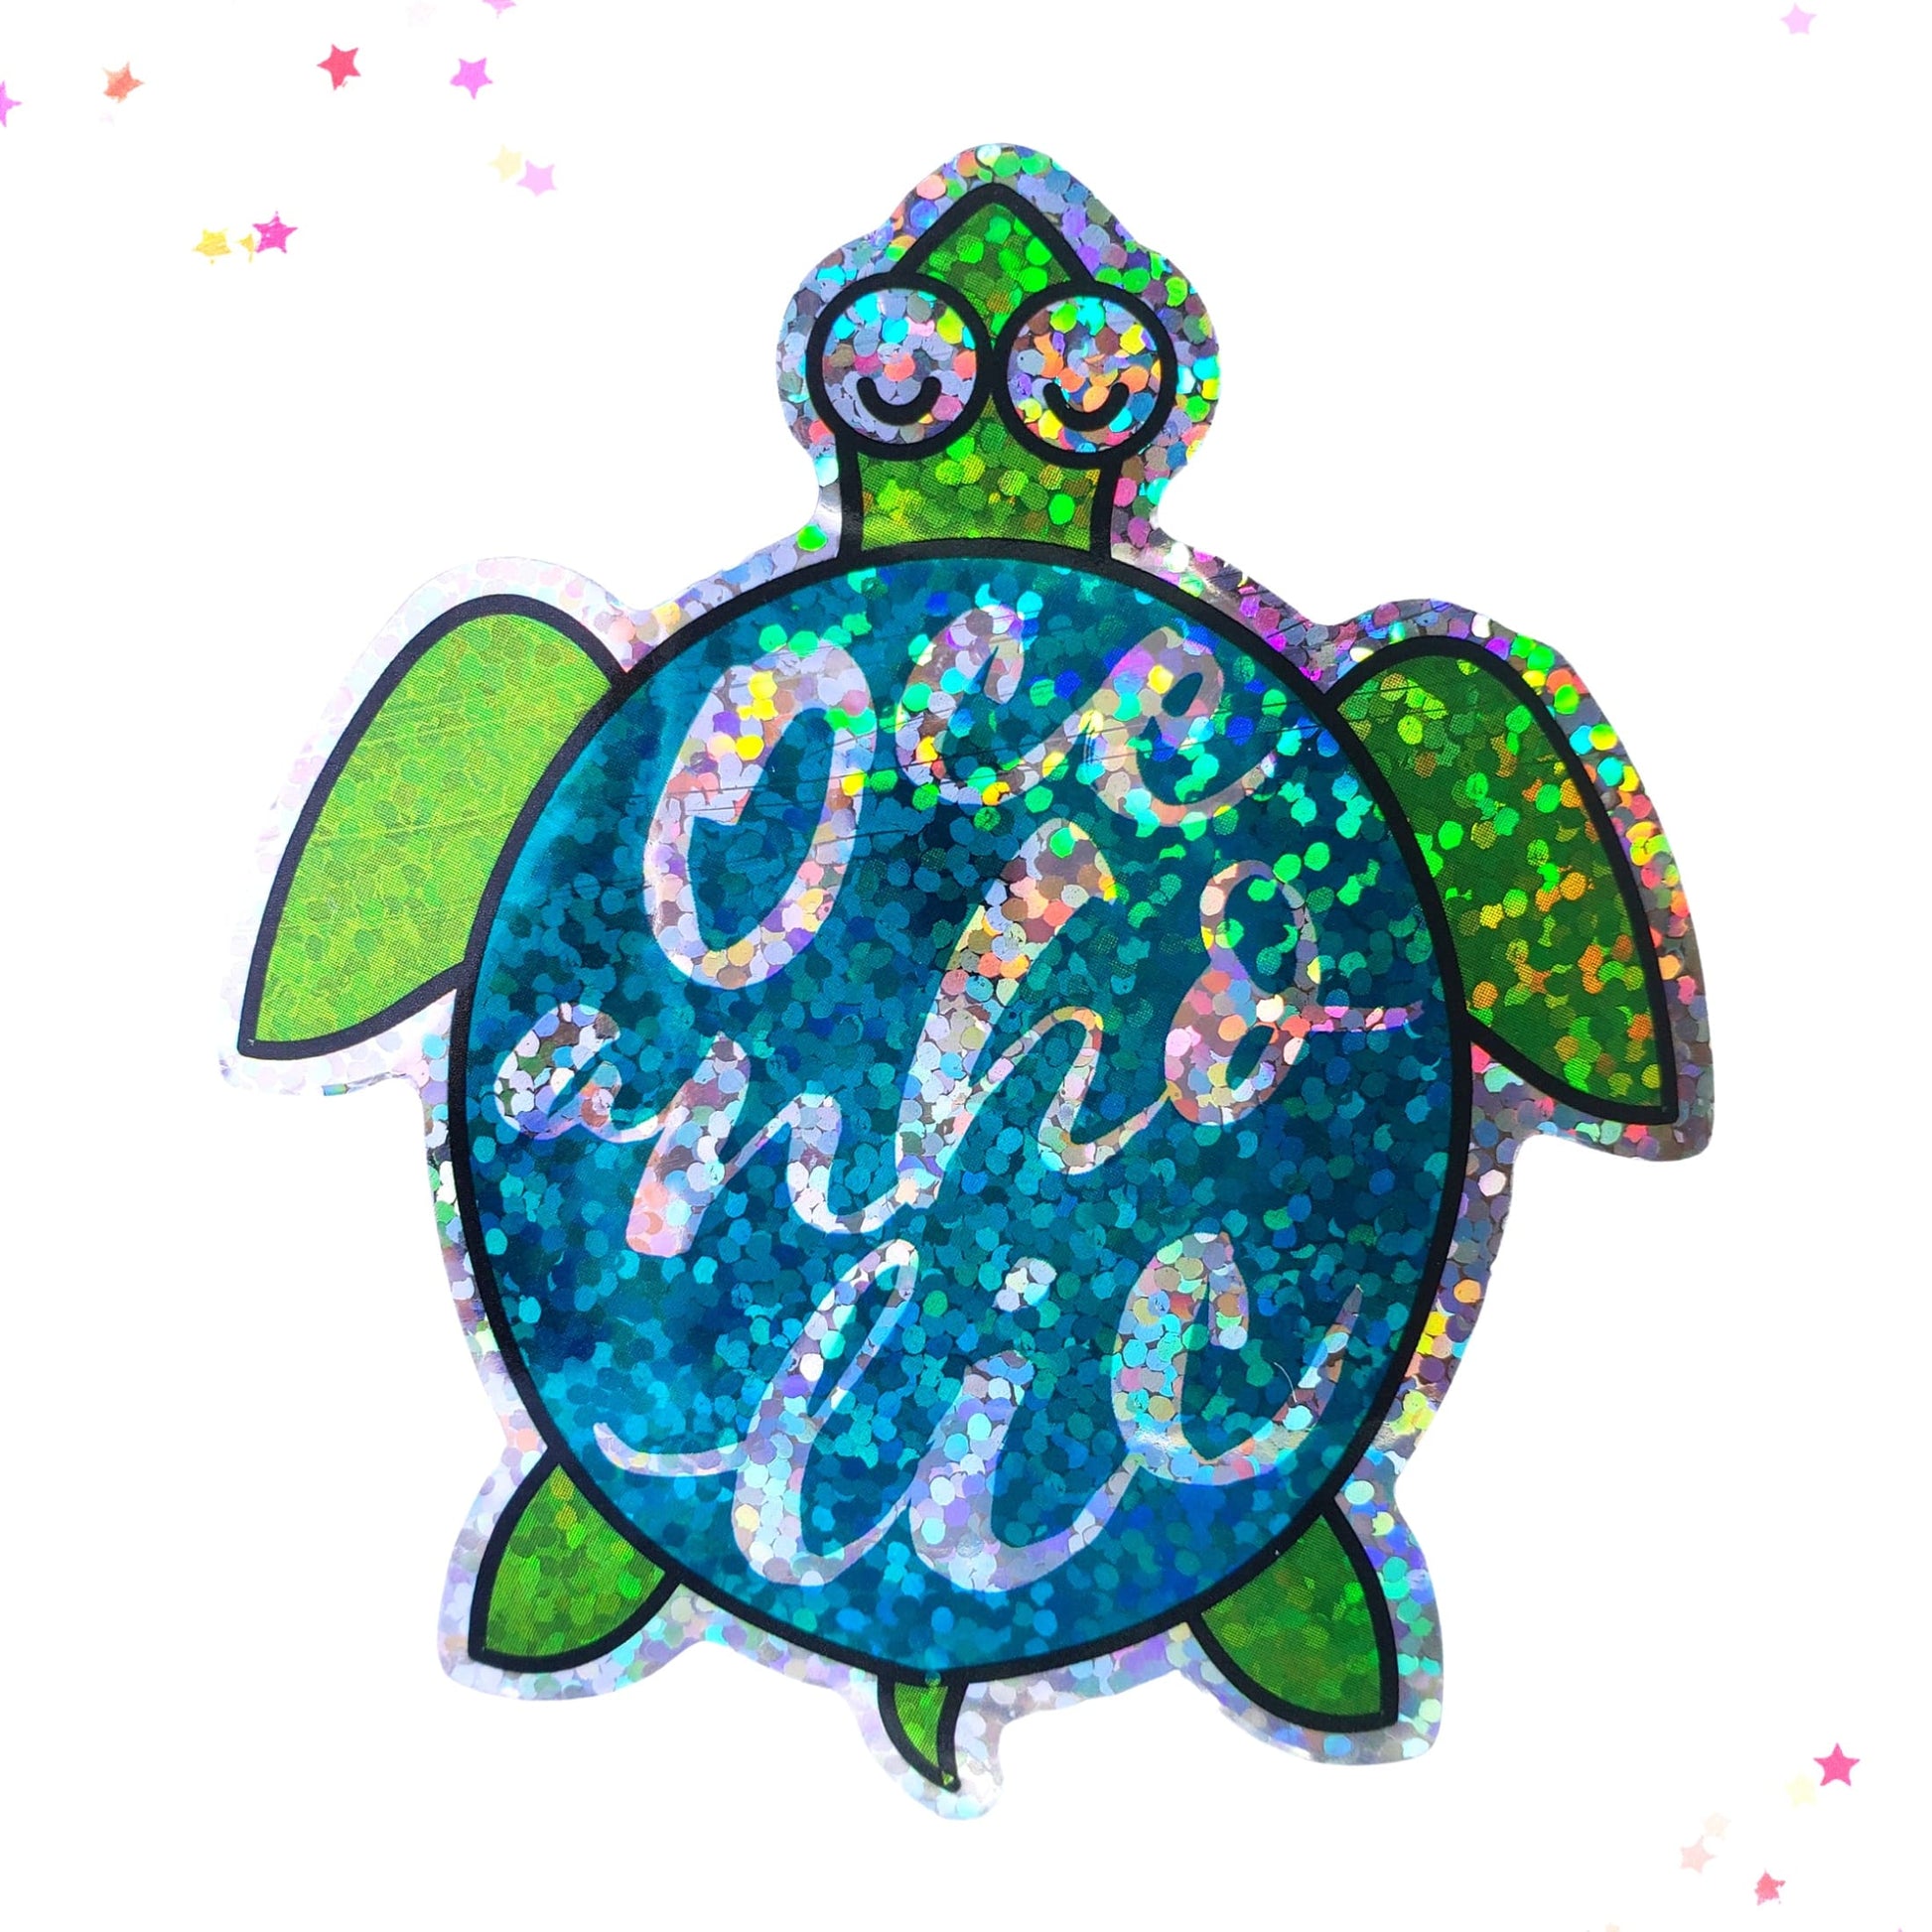 Premium Sticker - Sparkly Holographic Glitter Oceanholic Turtle from Confetti Kitty, Only 2.00